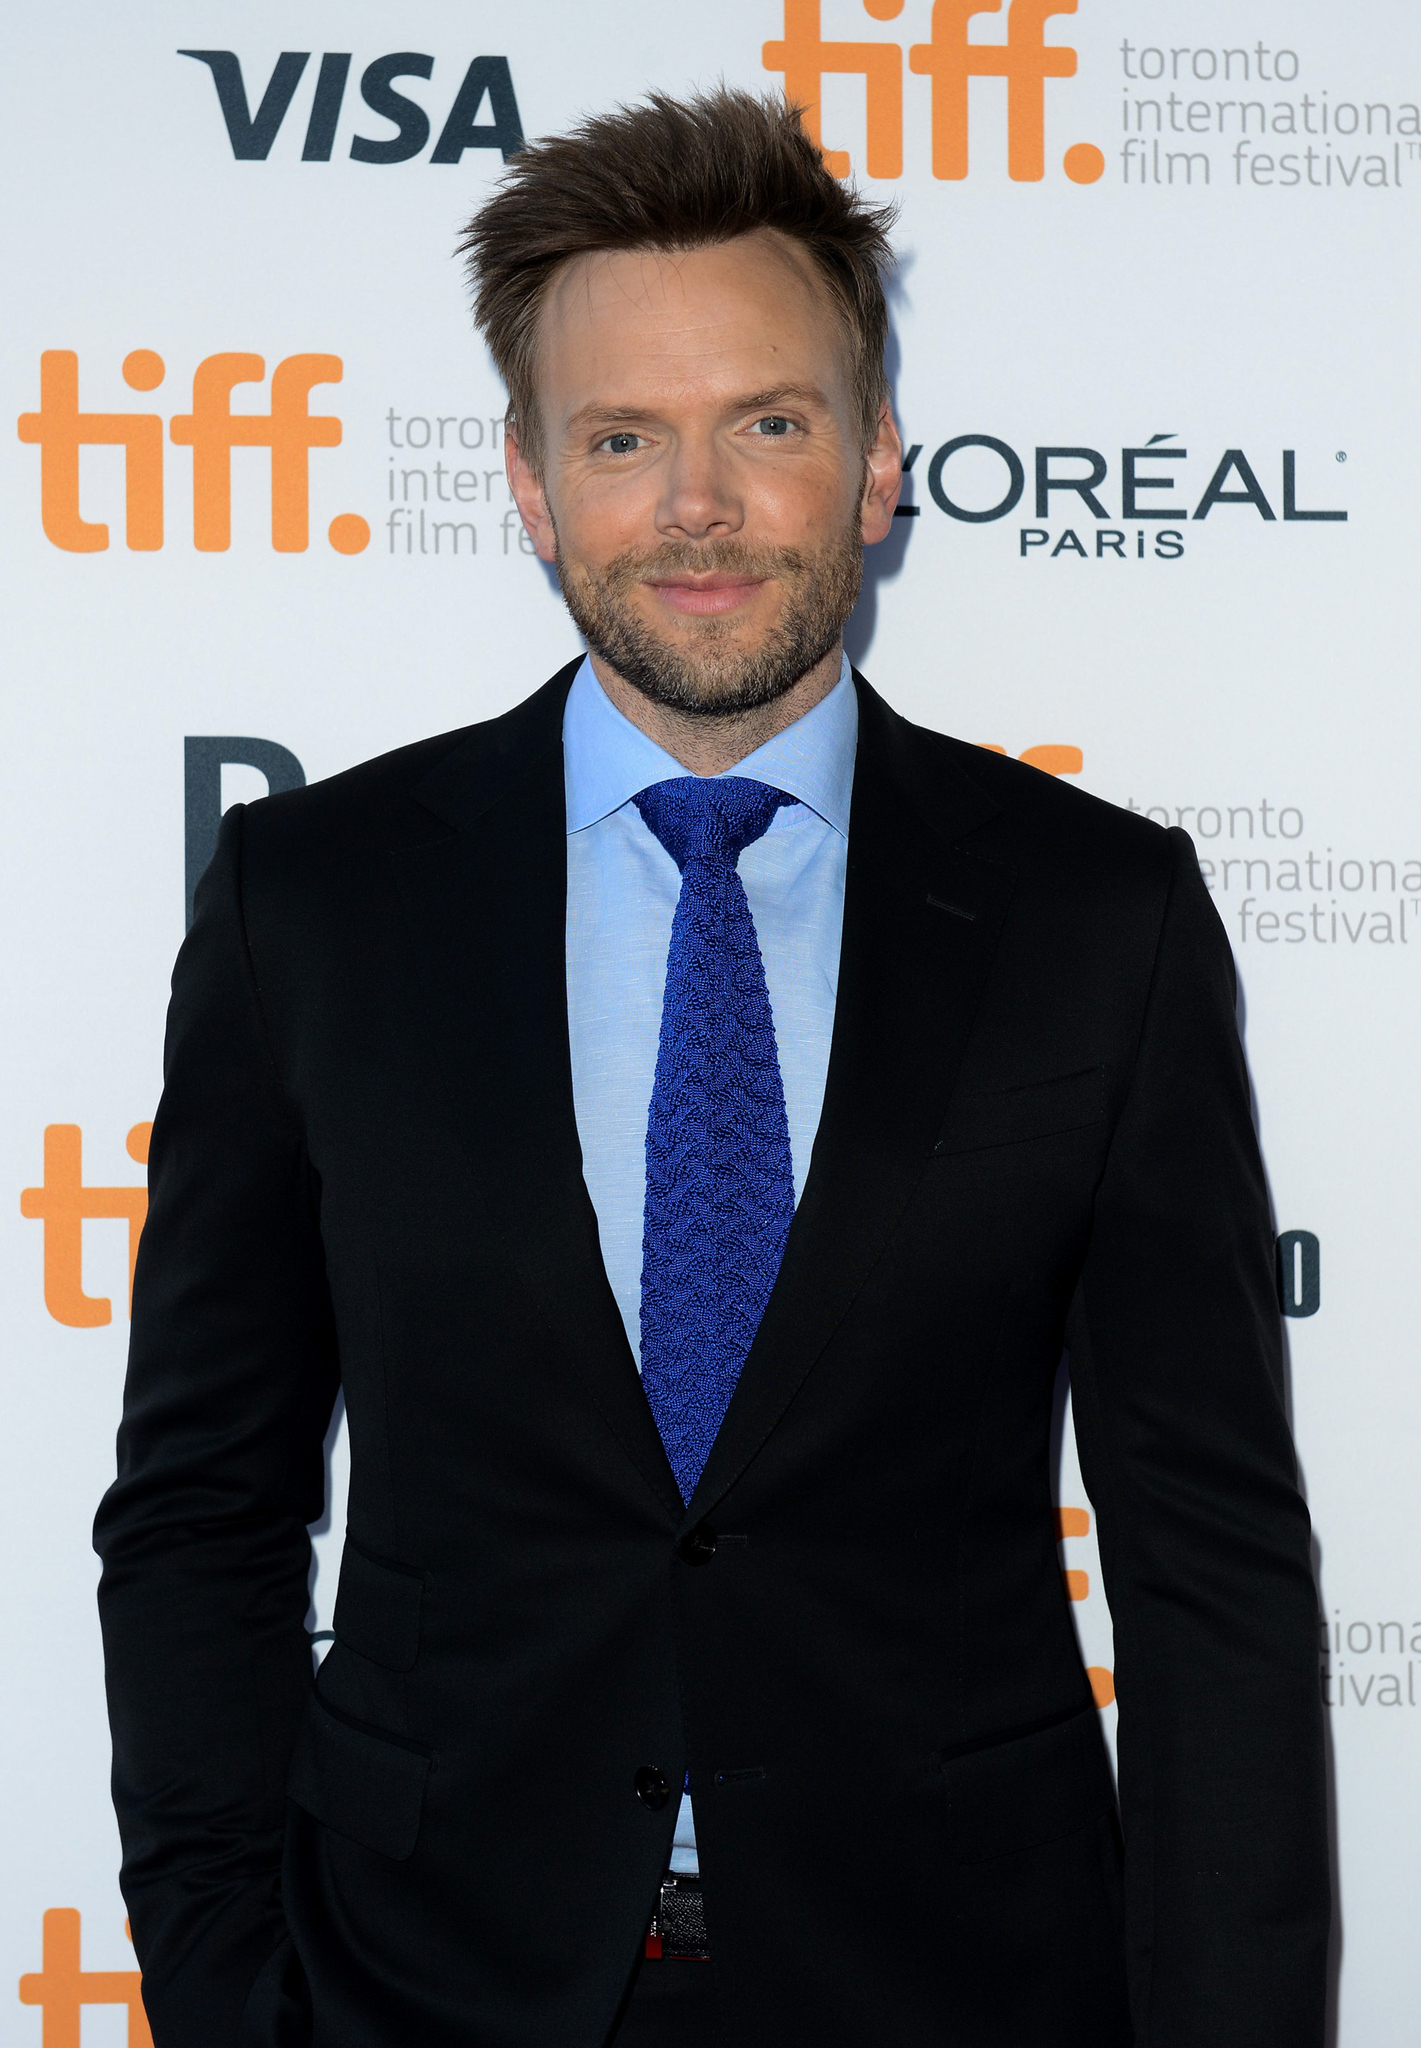 Joel McHale at event of Adult Beginners (2014)